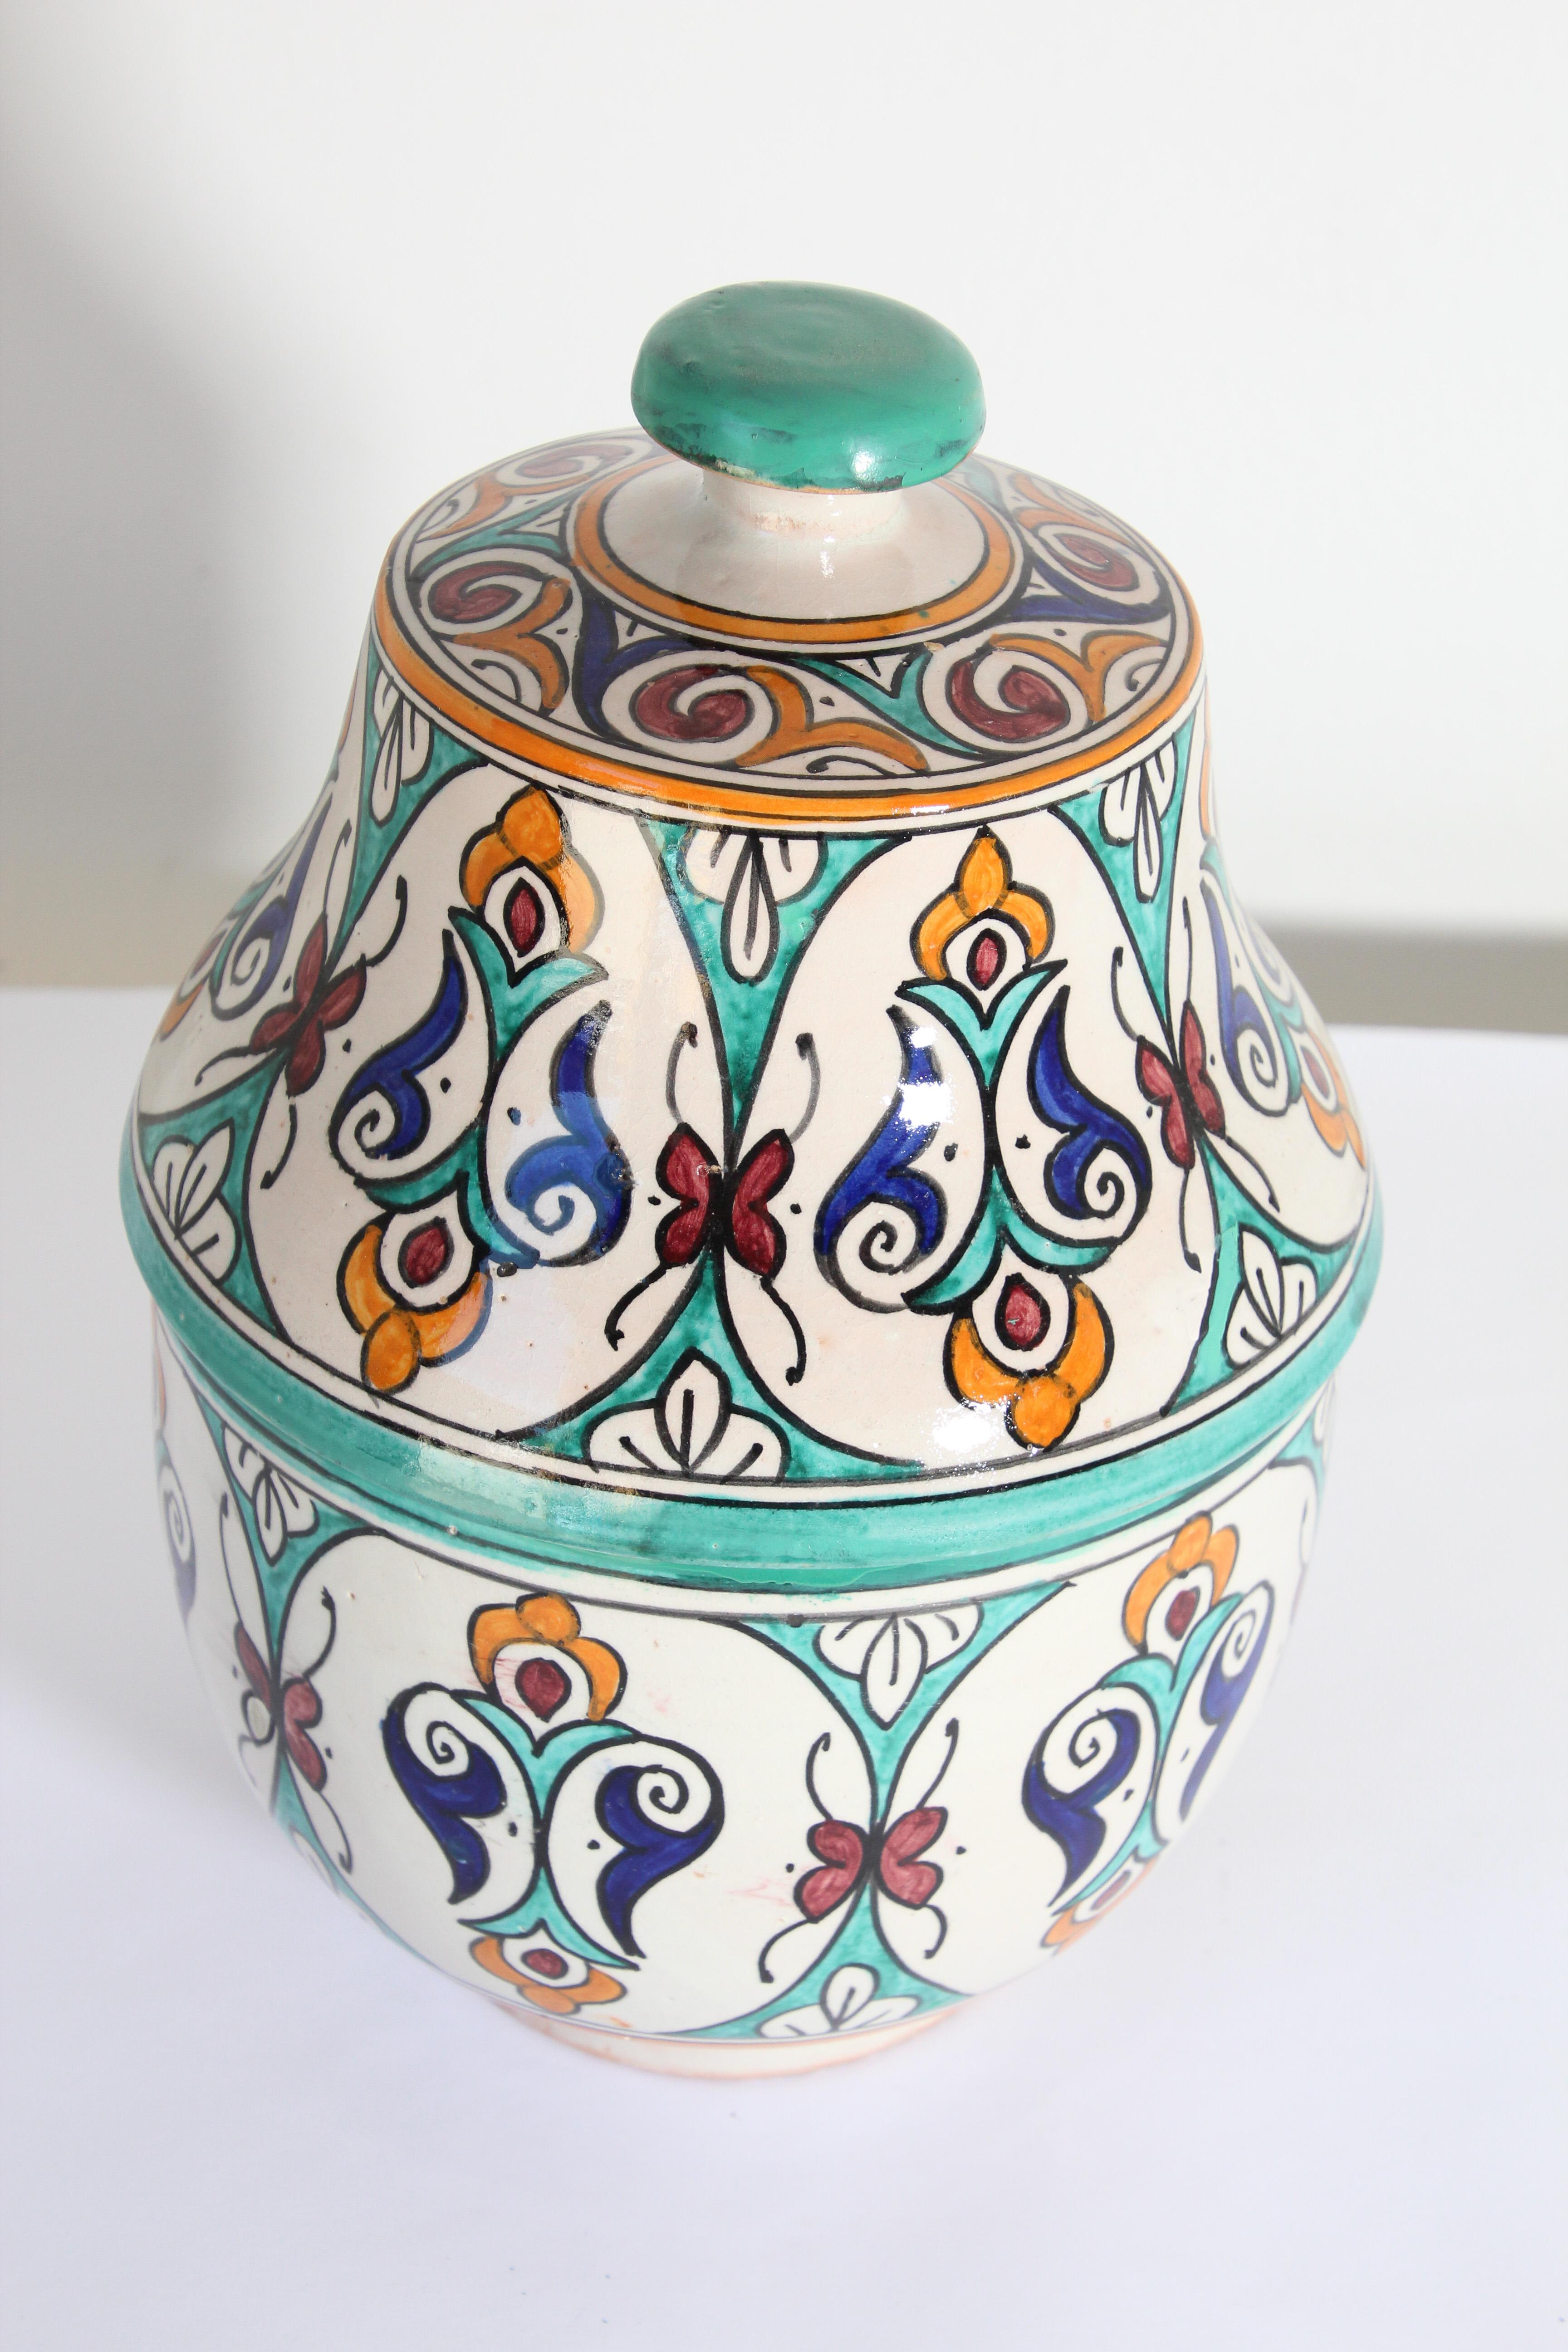 Hand-Crafted Glazed Moorish Ceramic Covered Jar Handcrafted in Fez Morocco For Sale